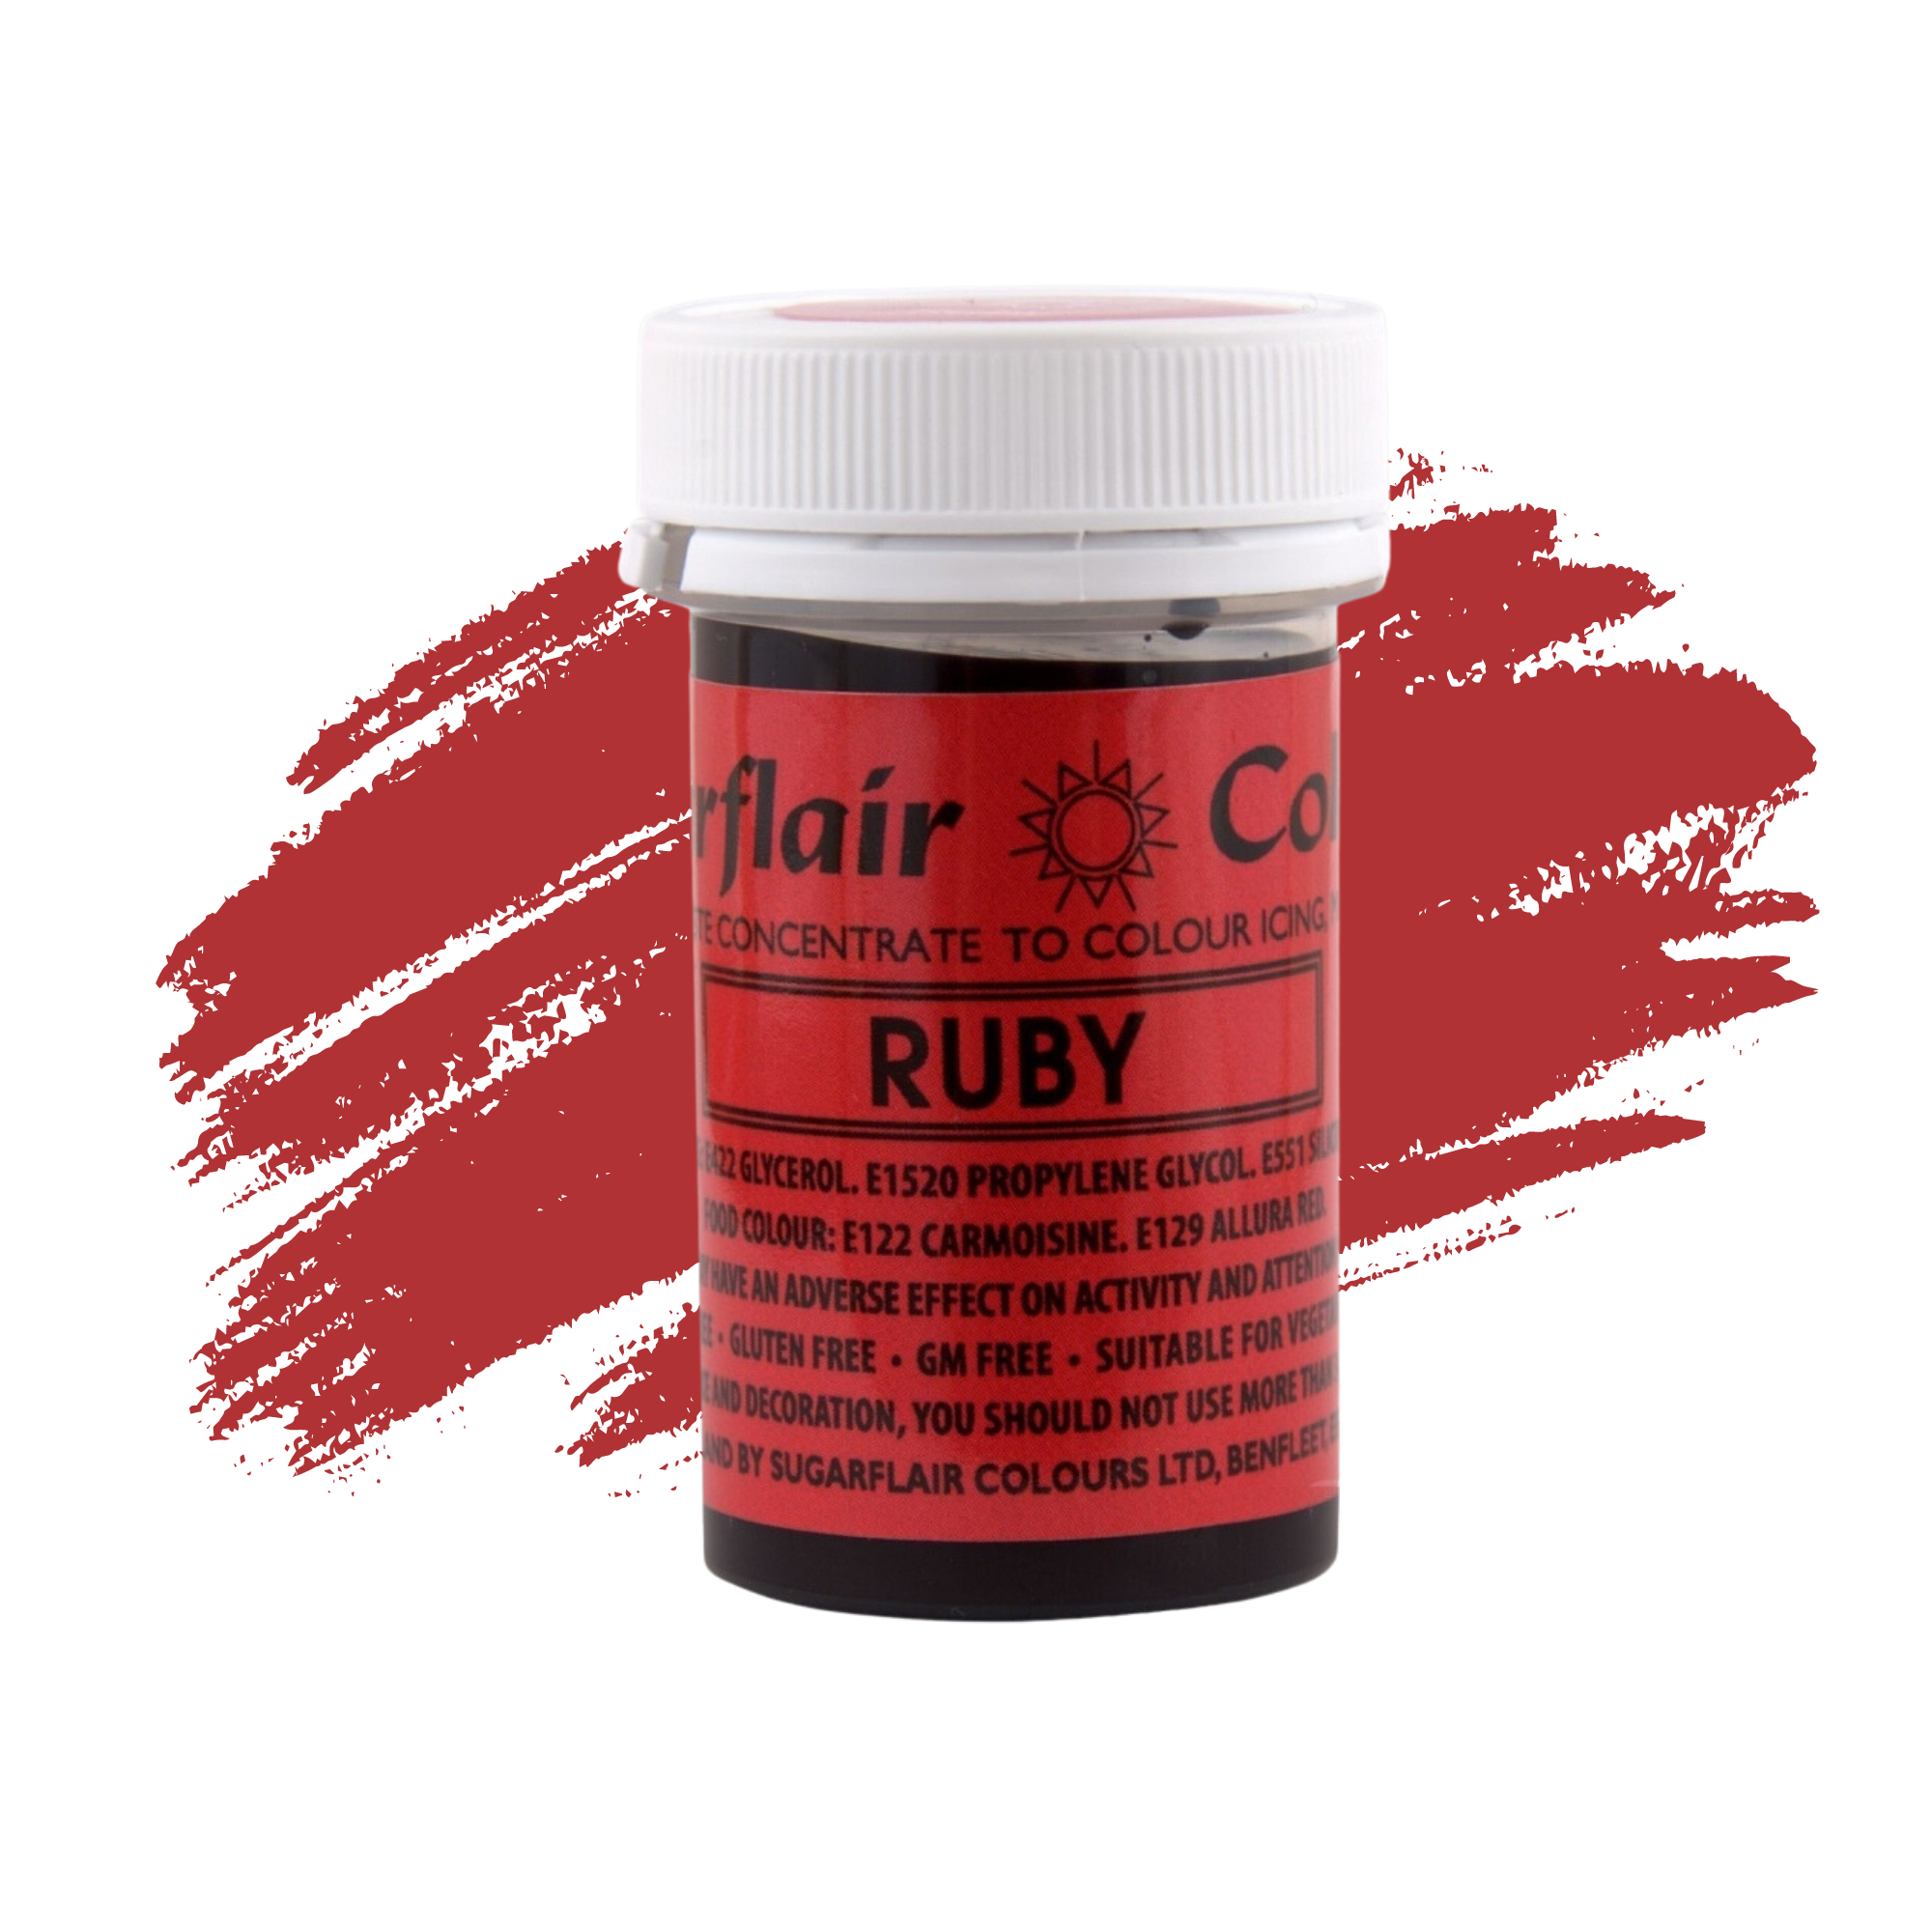 Sugarflair Paste Colours Concentrated Food Colouring - Spectral Ruby Red - 25g